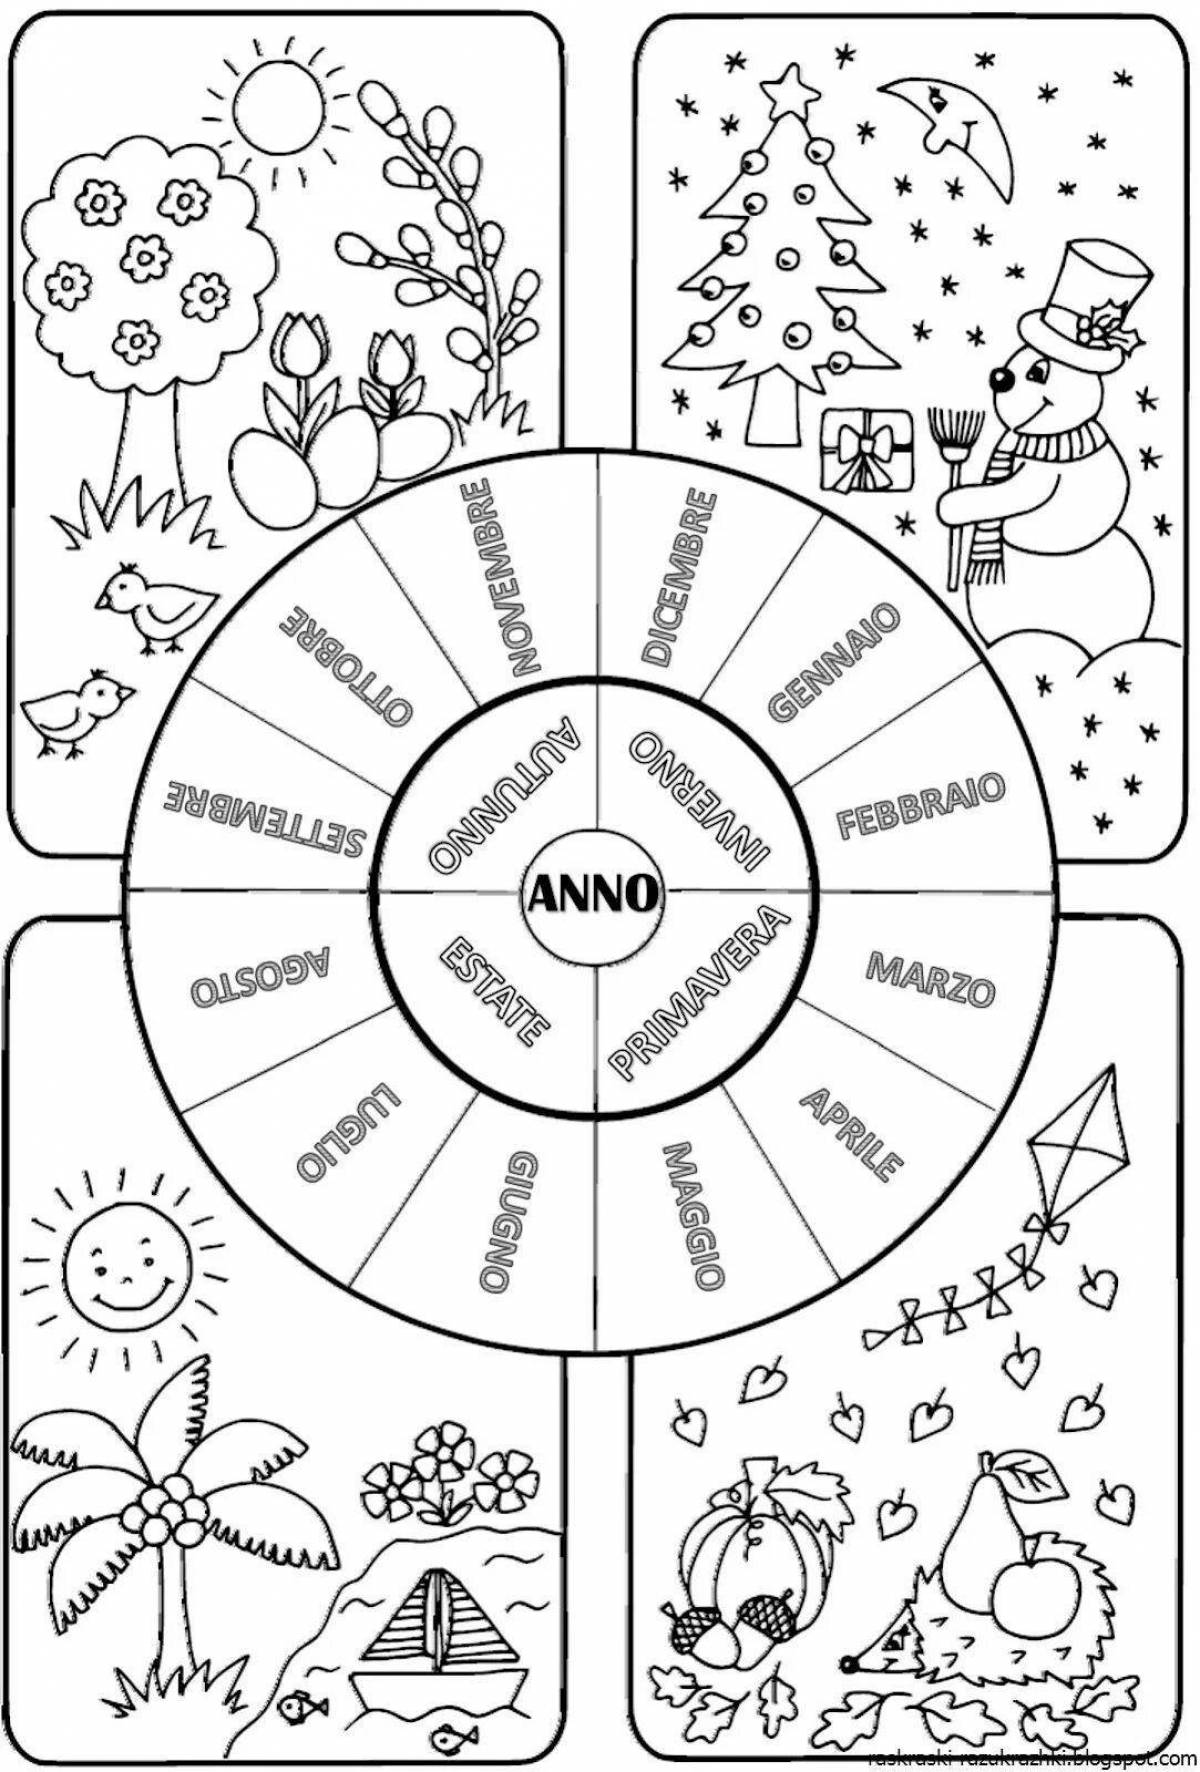 Coloring pages of the months of the year for preschoolers